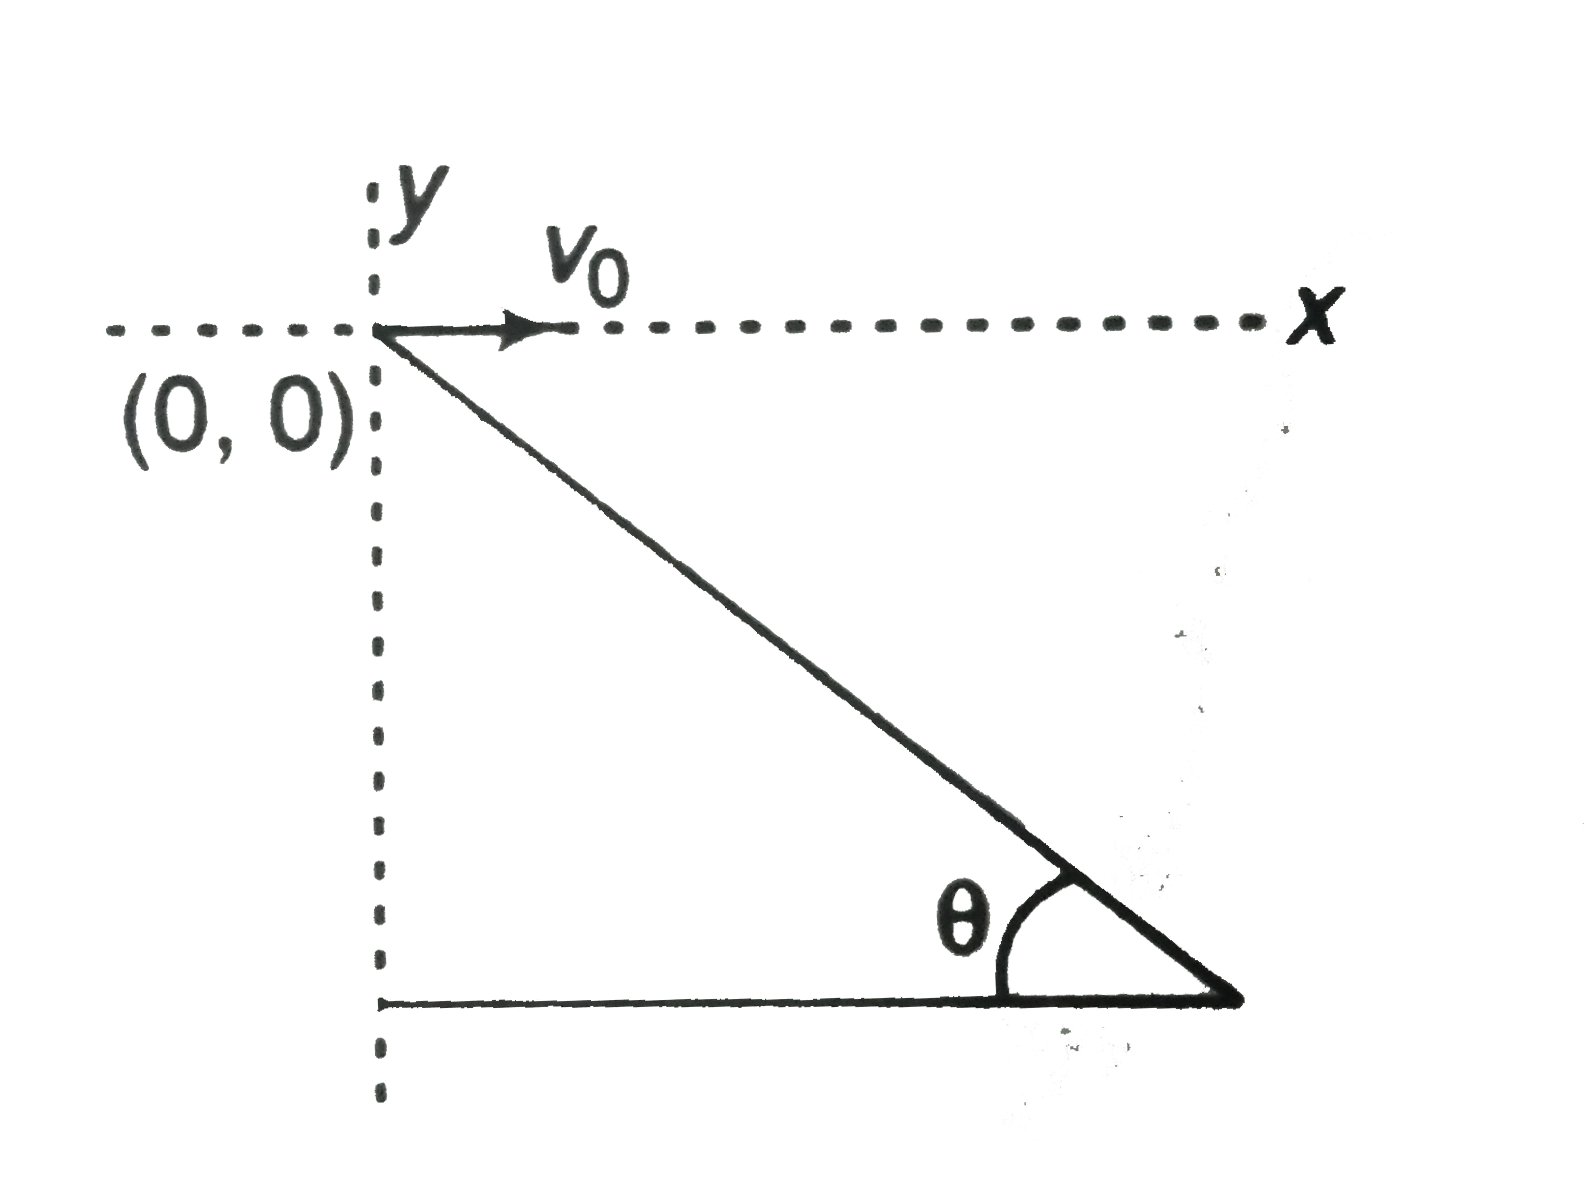 A man standing on a hill top projects a stone horizontally with speed v0 as shown in figure. Taking the co-ordinate system as given in the figure. Find the co-ordinates of the point where the stone will hit the hill surface.